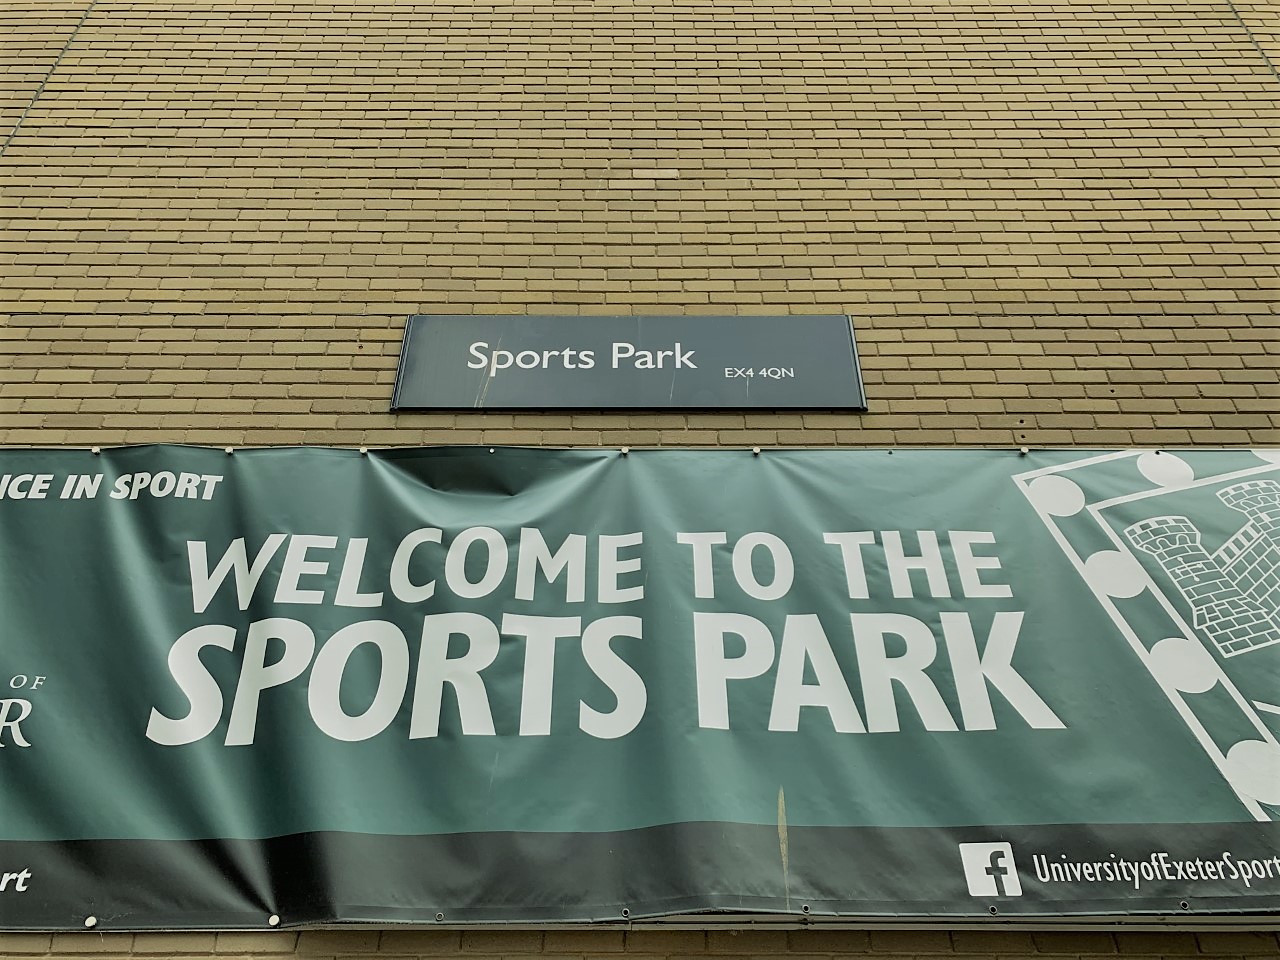 "Welcome to the Sports Park" banner on the wall of the Sports Park building on Streatham Campus